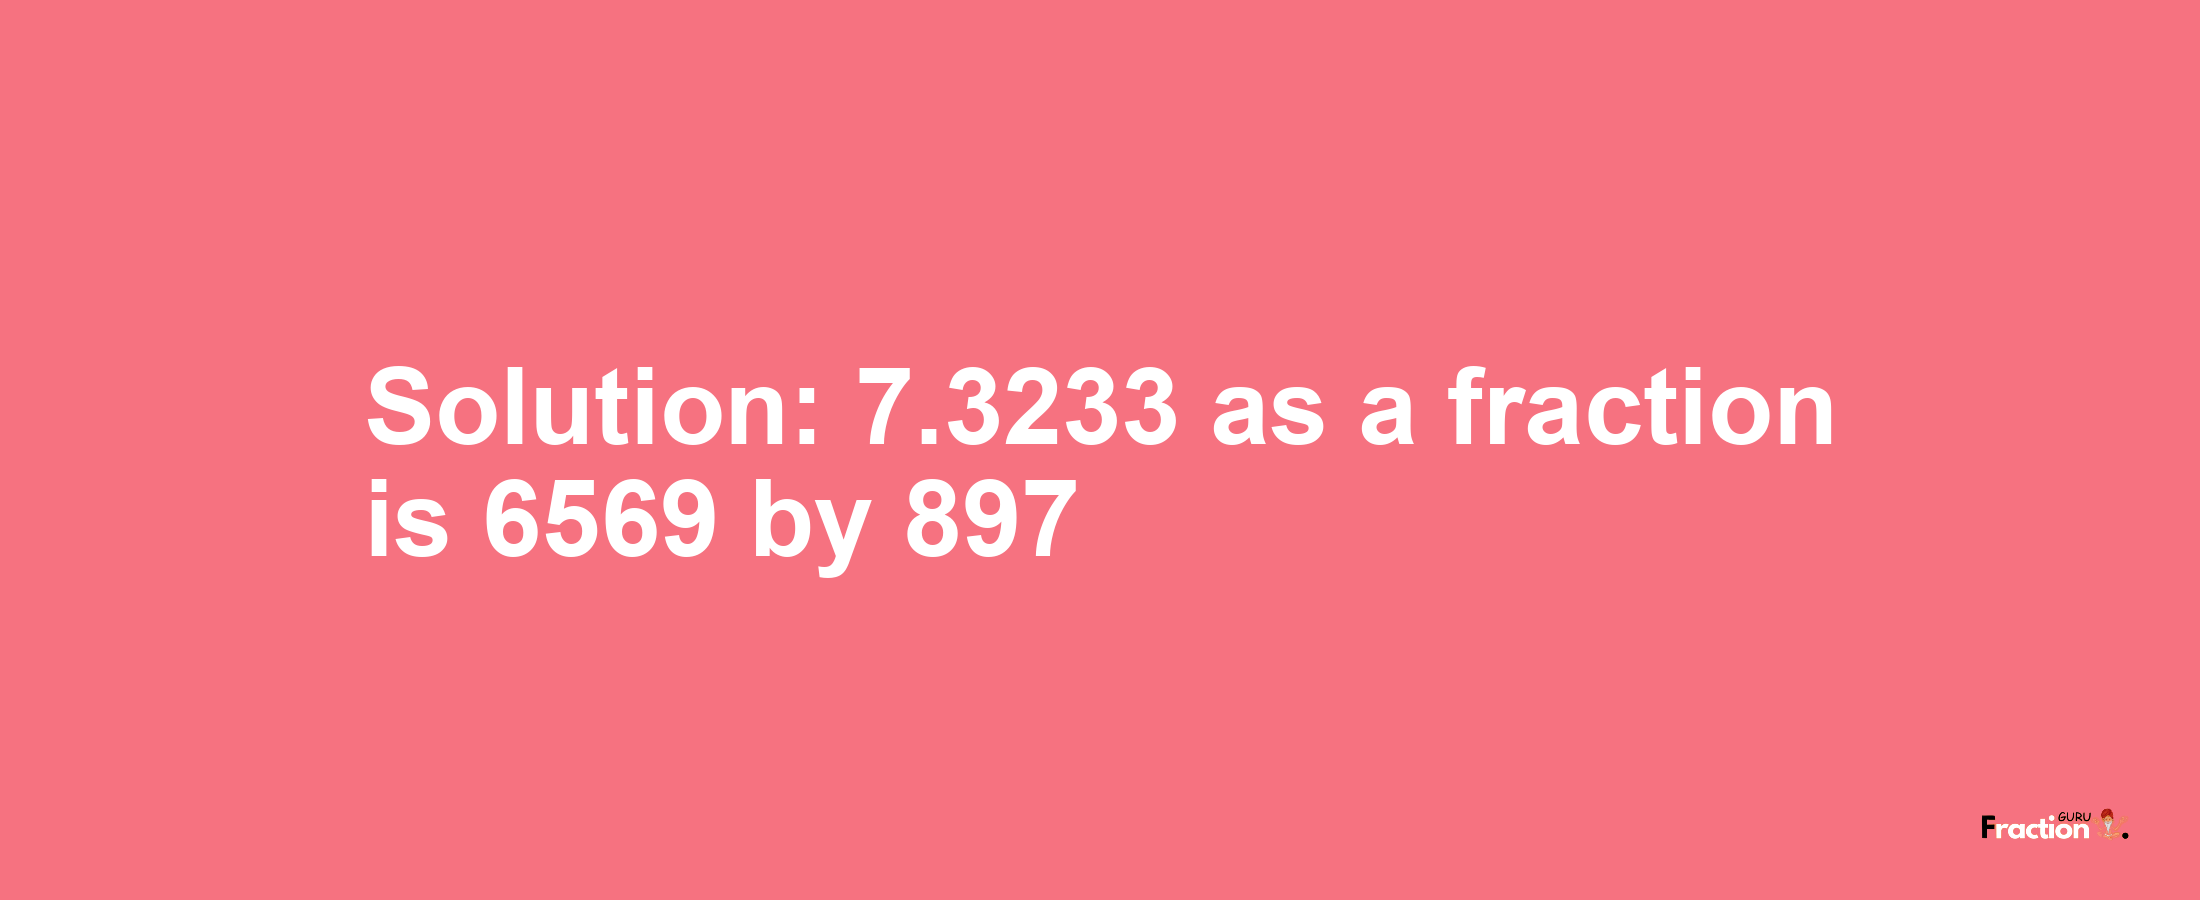 Solution:7.3233 as a fraction is 6569/897